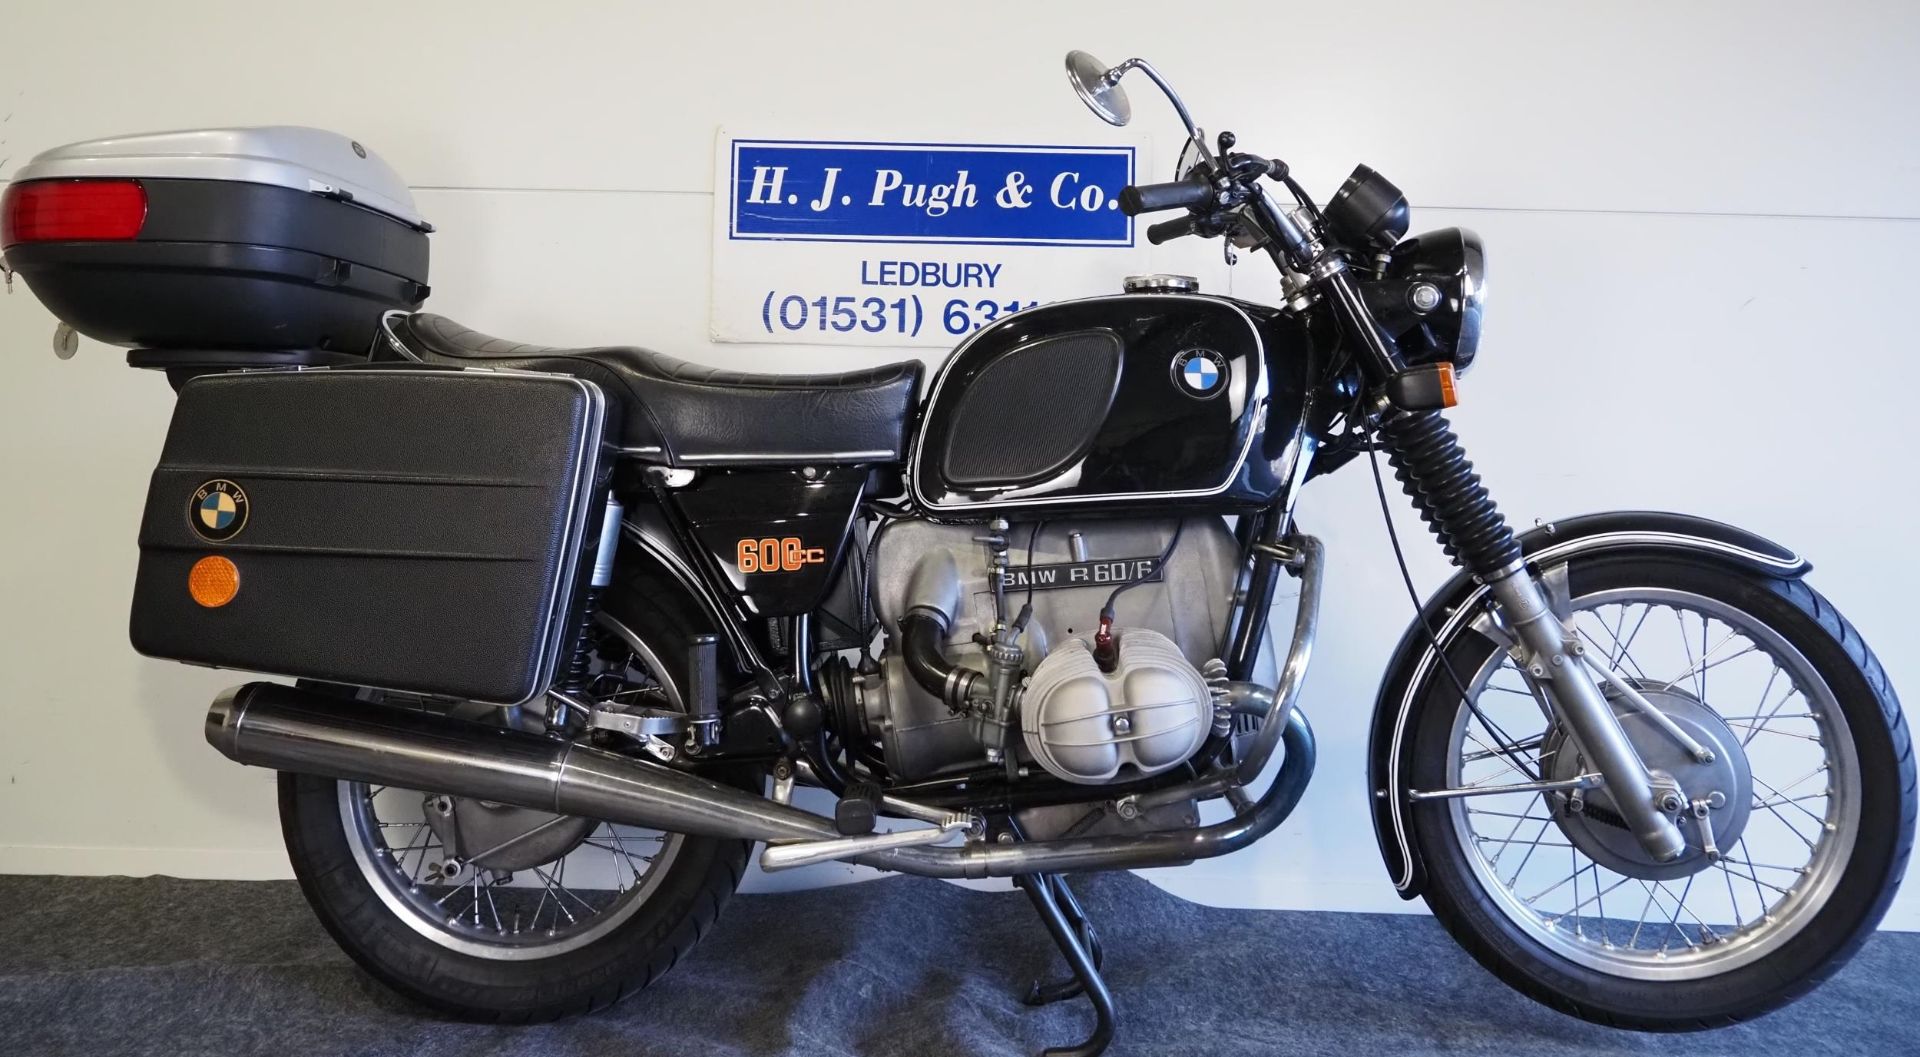 BMW R60/6 motorcycle. 1976. 599cc Frame No. 2961212 Engine No. 2961212 Property of a deceased - Image 2 of 8